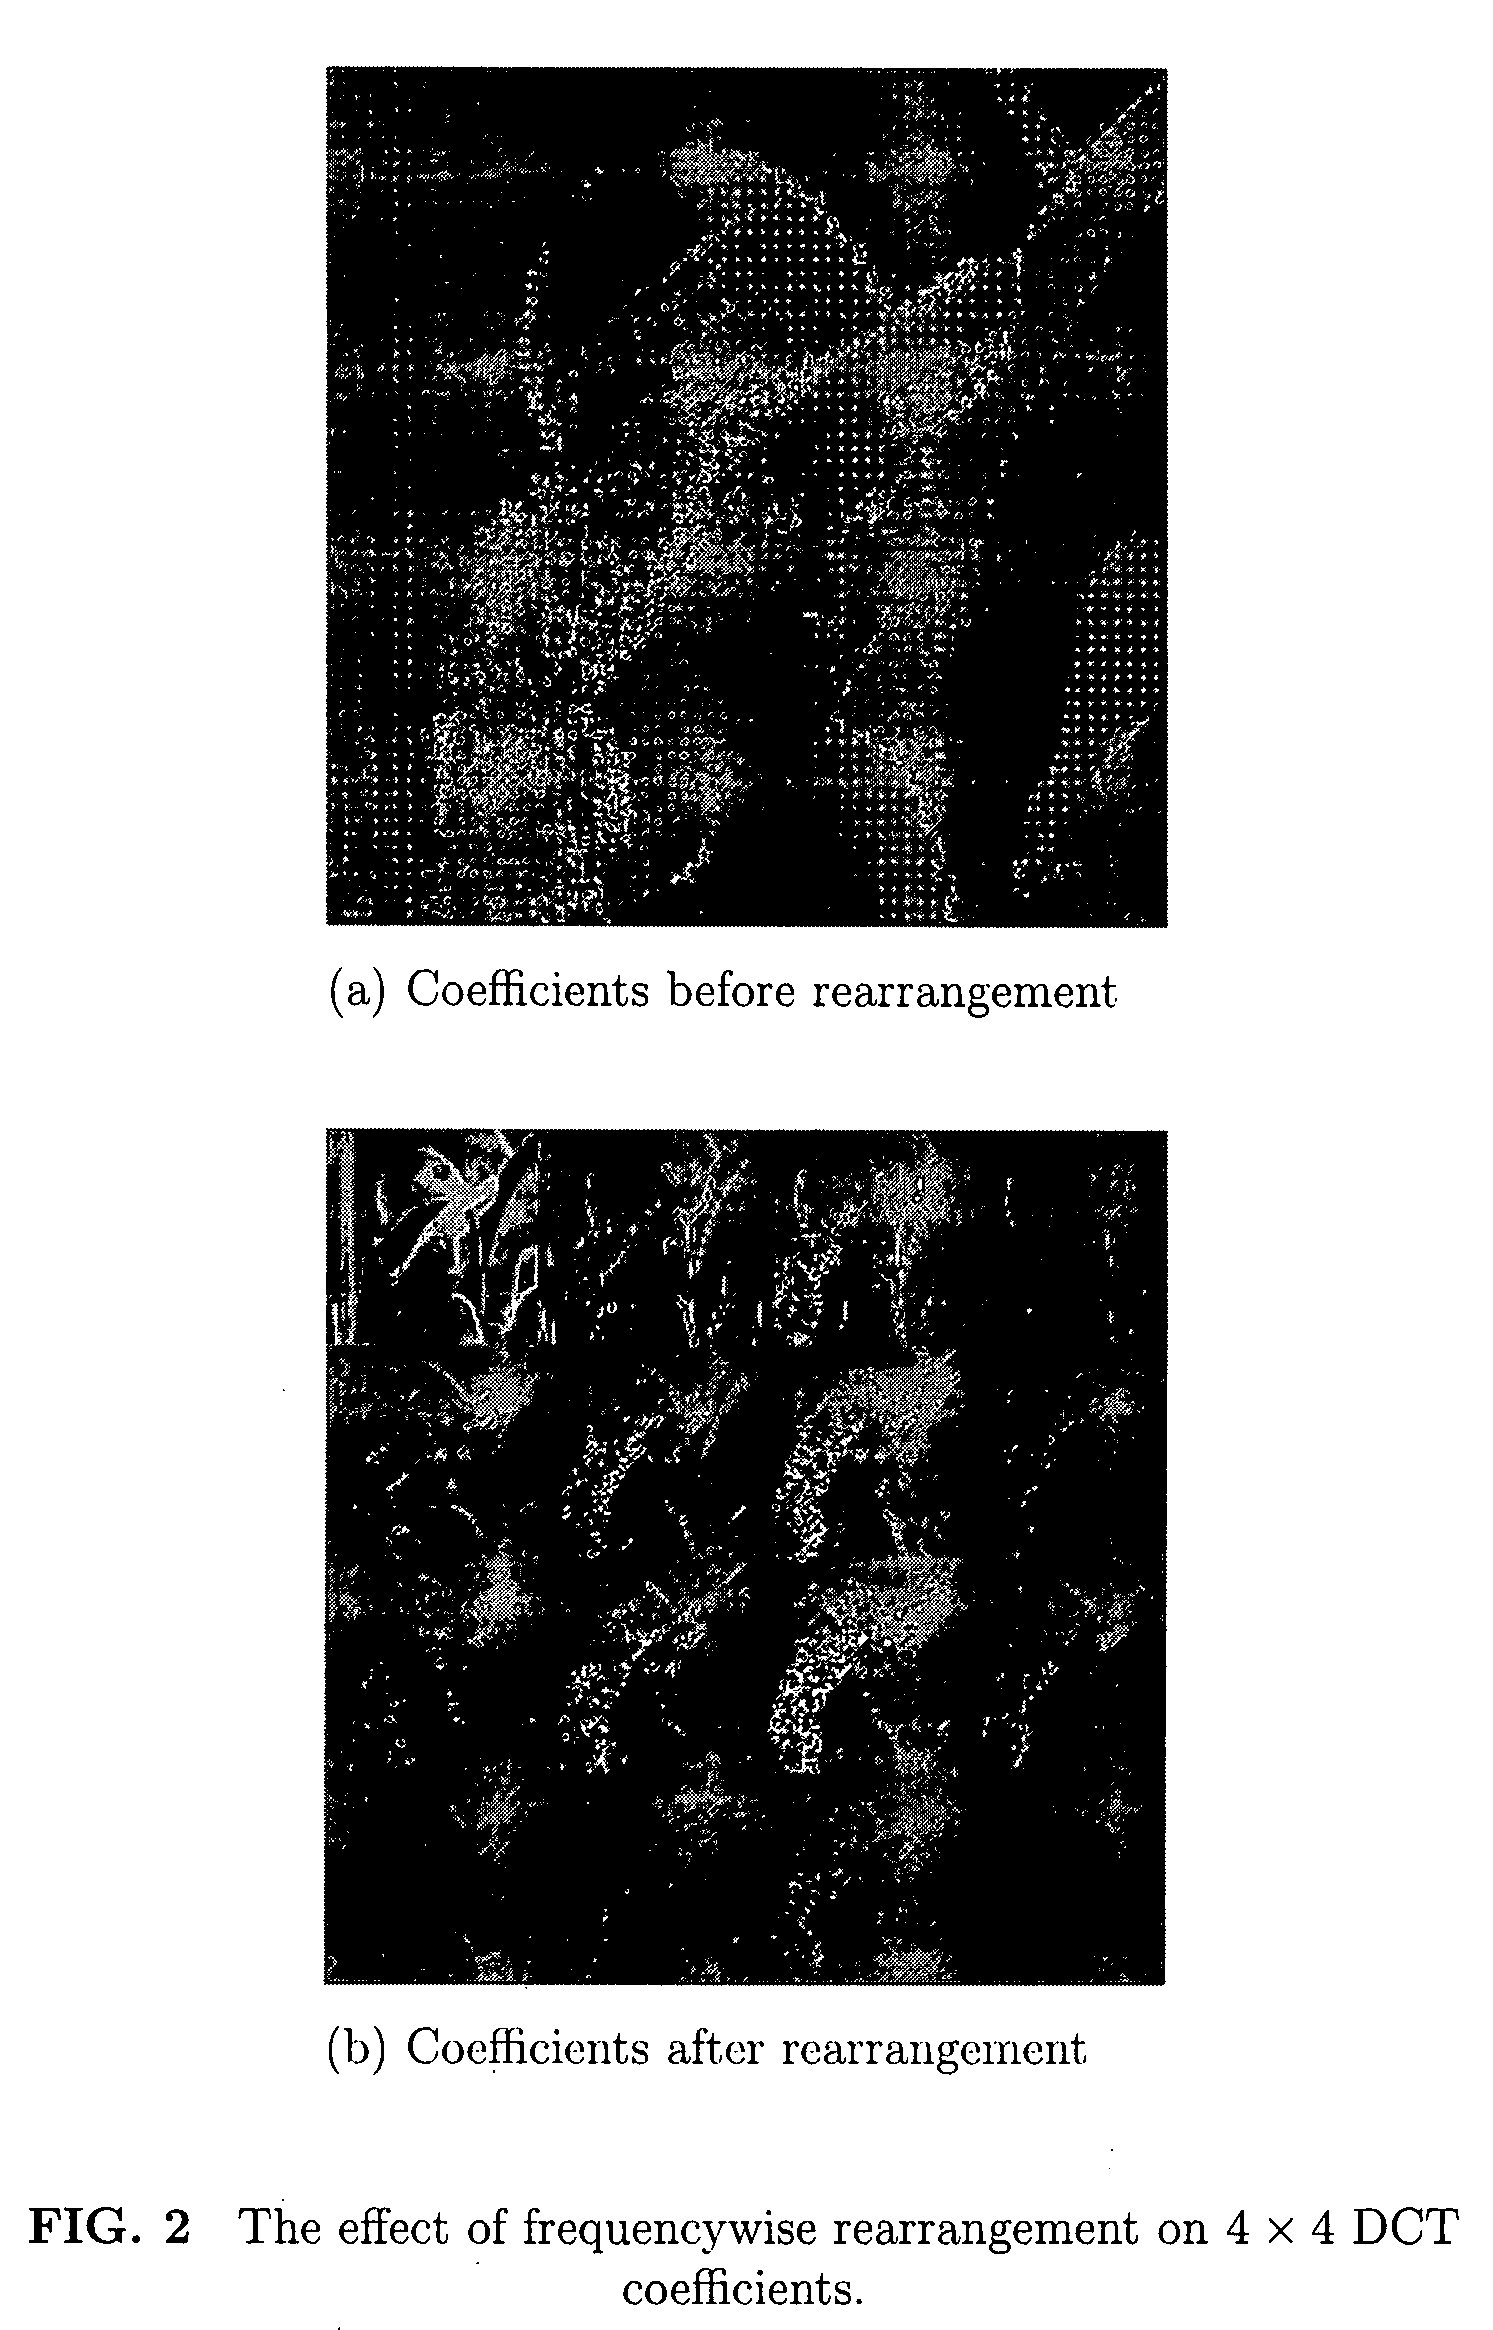 Image compression based on union of DCT and wavelet transform